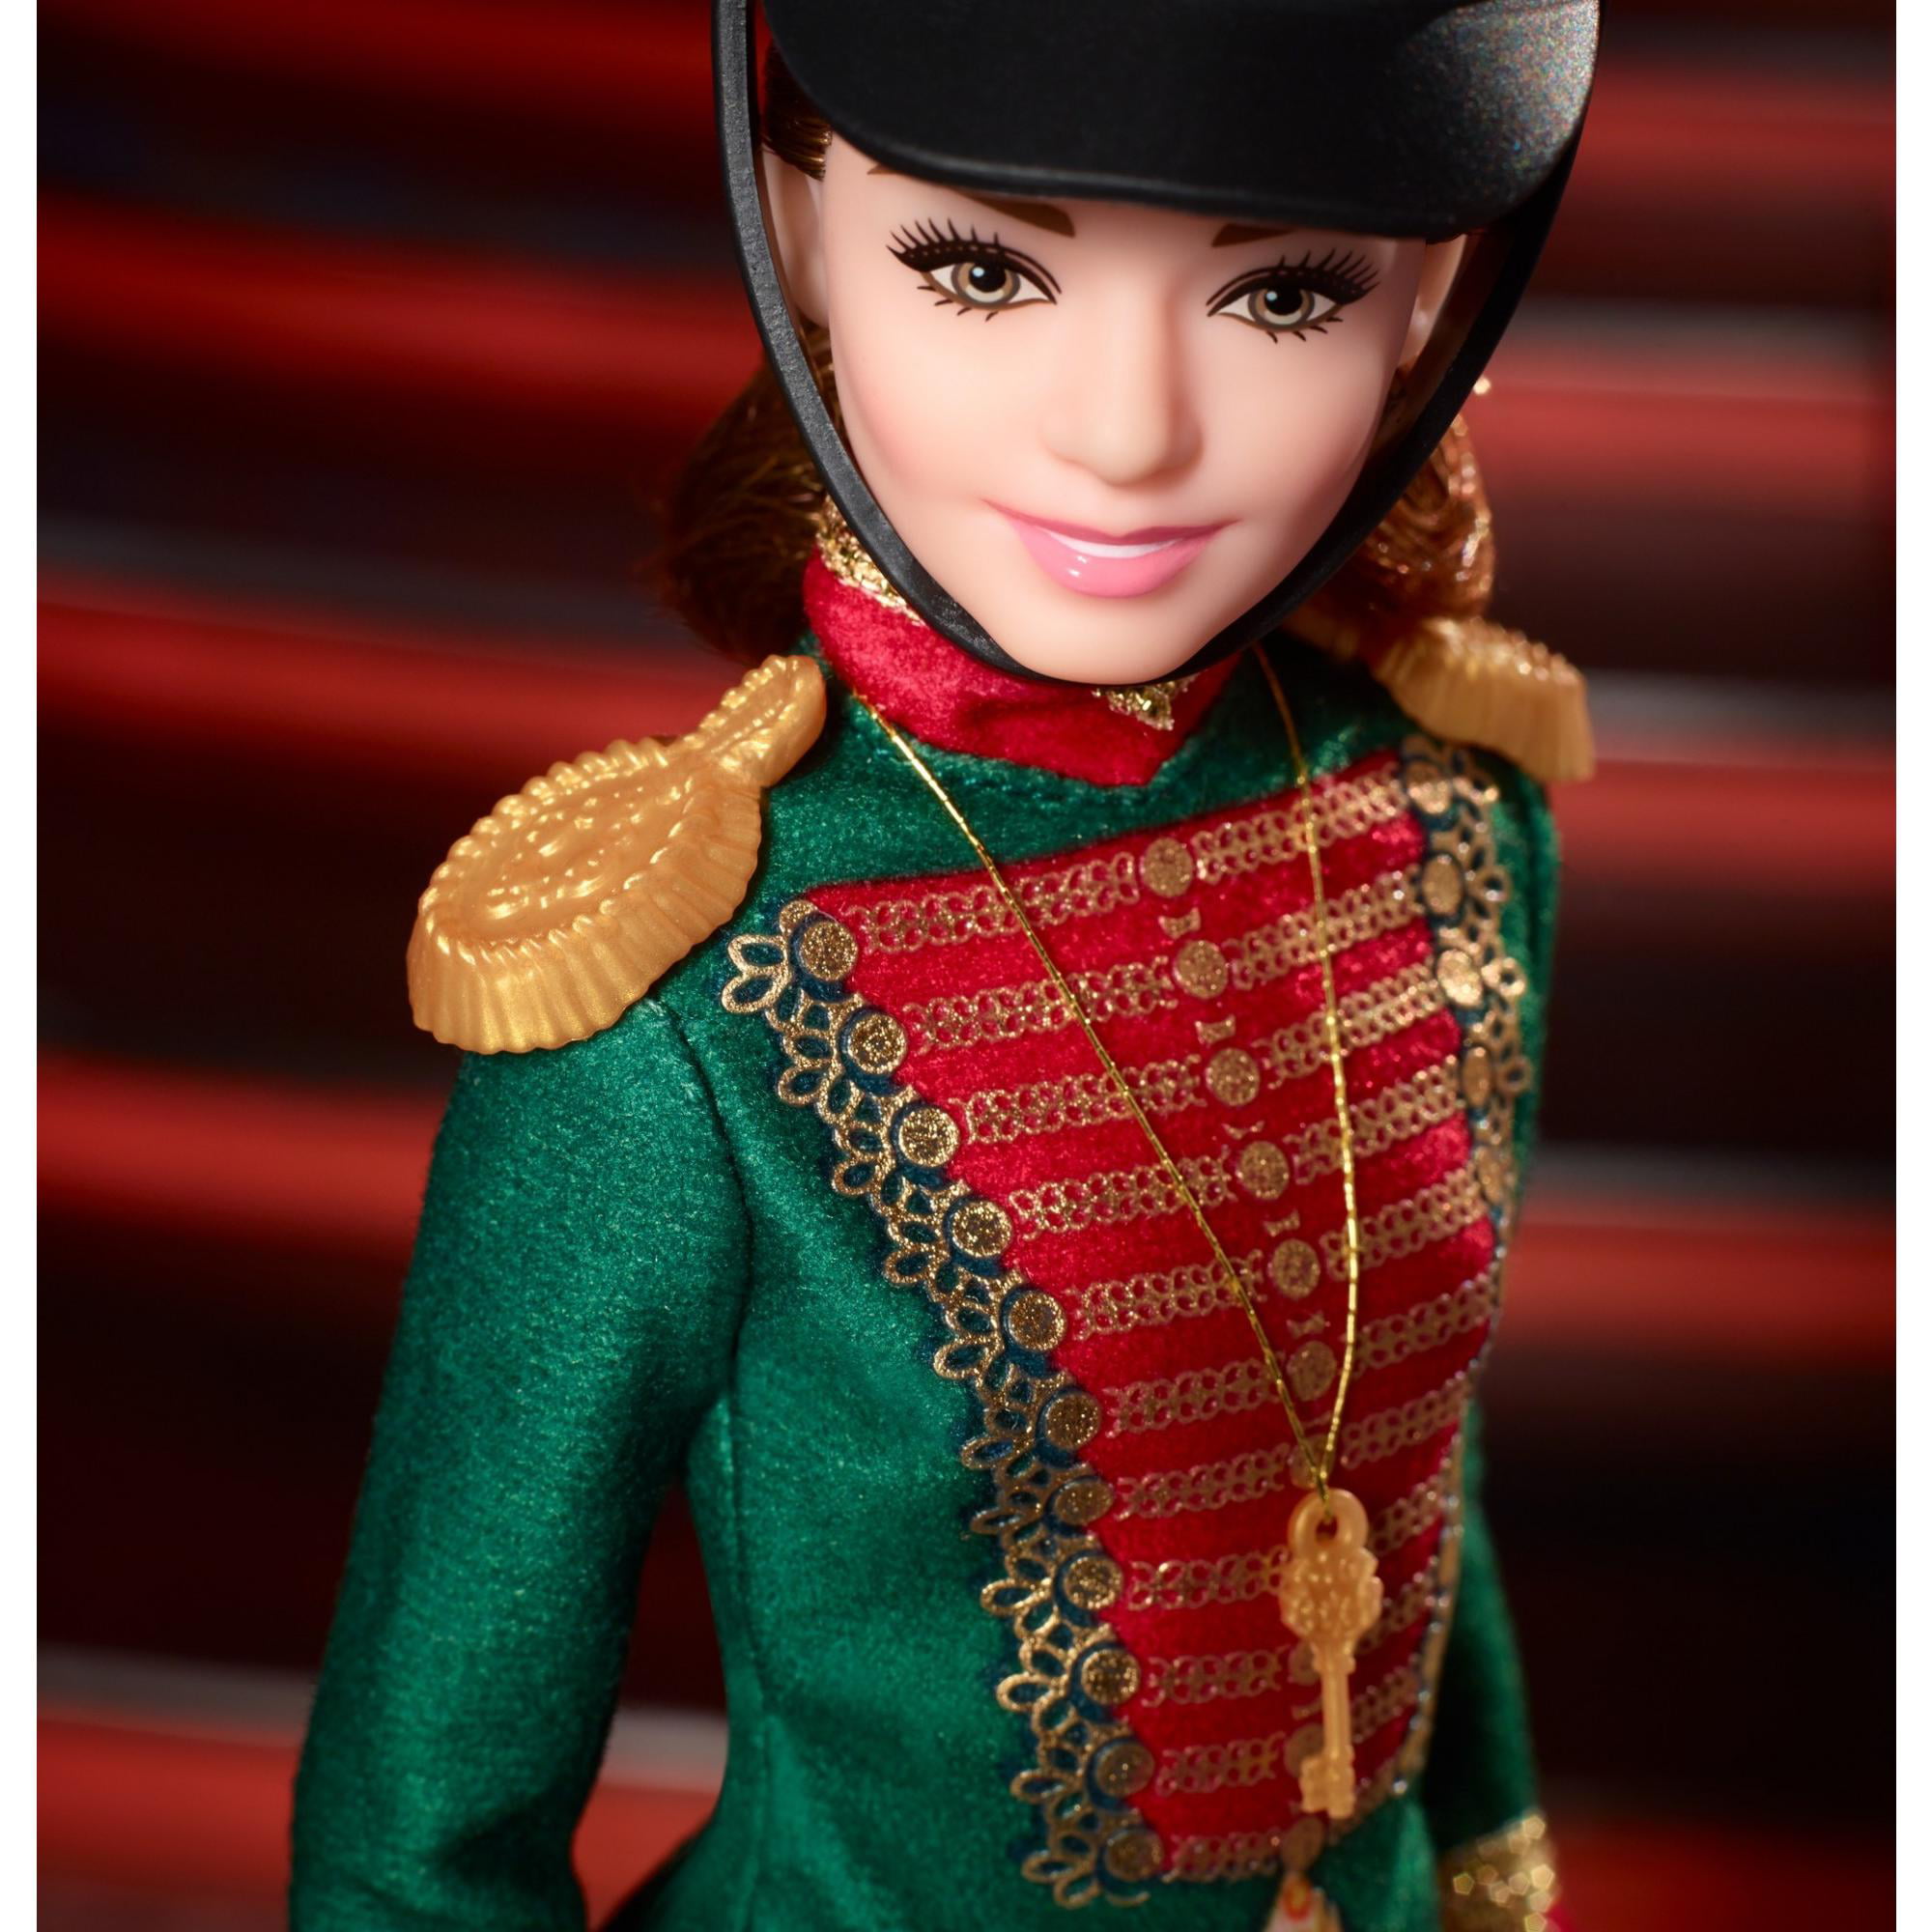 Barbie The Nutcracker and the Four Realms Clara Toy Soldier Doll 